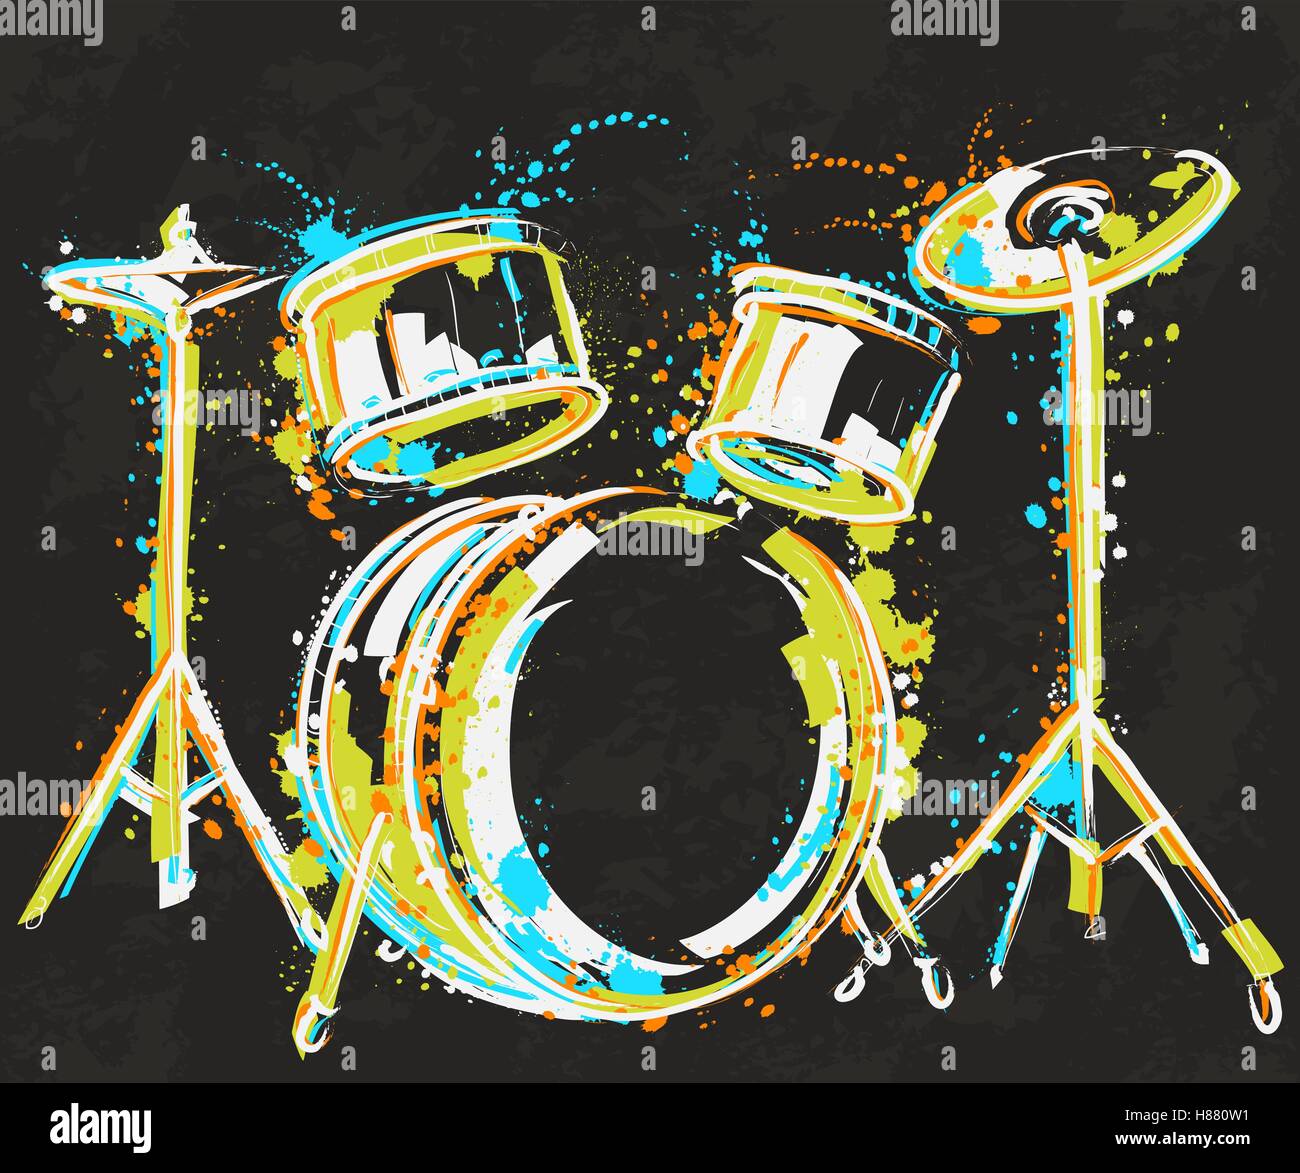 Drum kit with splashes in watercolor style. Stock Vector